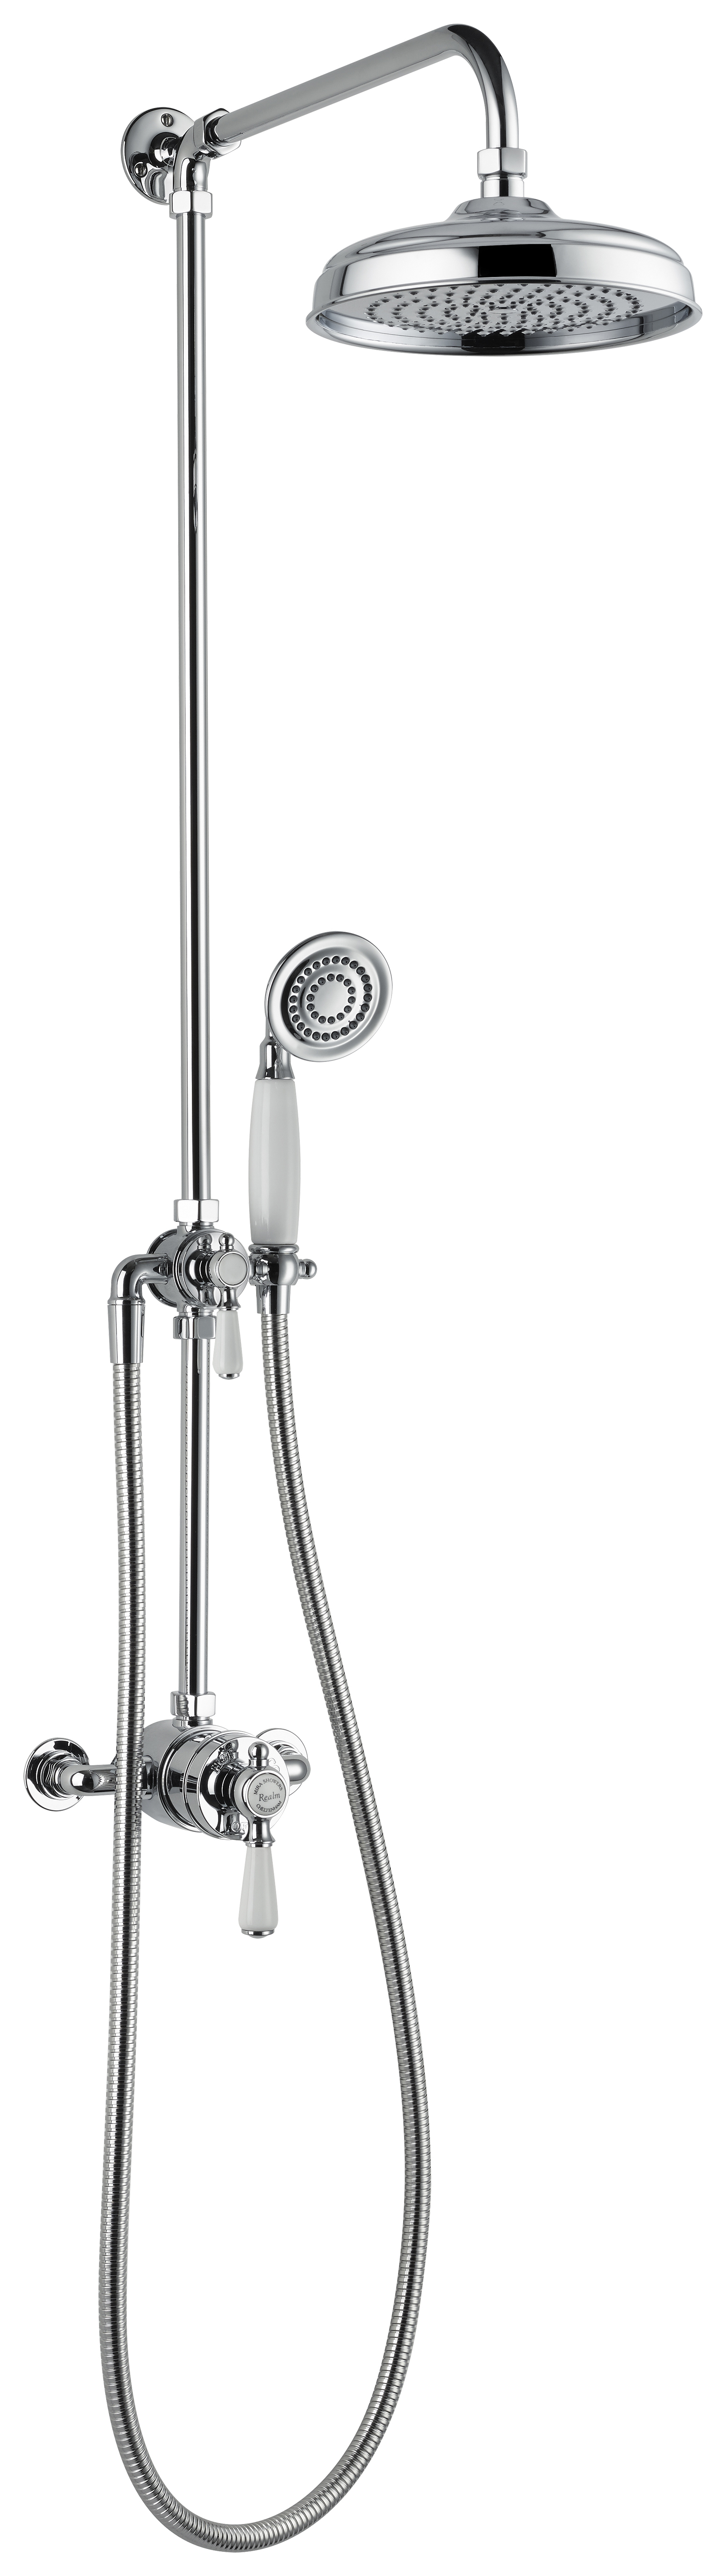 Image of Mira Realm Dual Outlet ERD Thermostatic Rear Fed Mixer Shower - Chrome